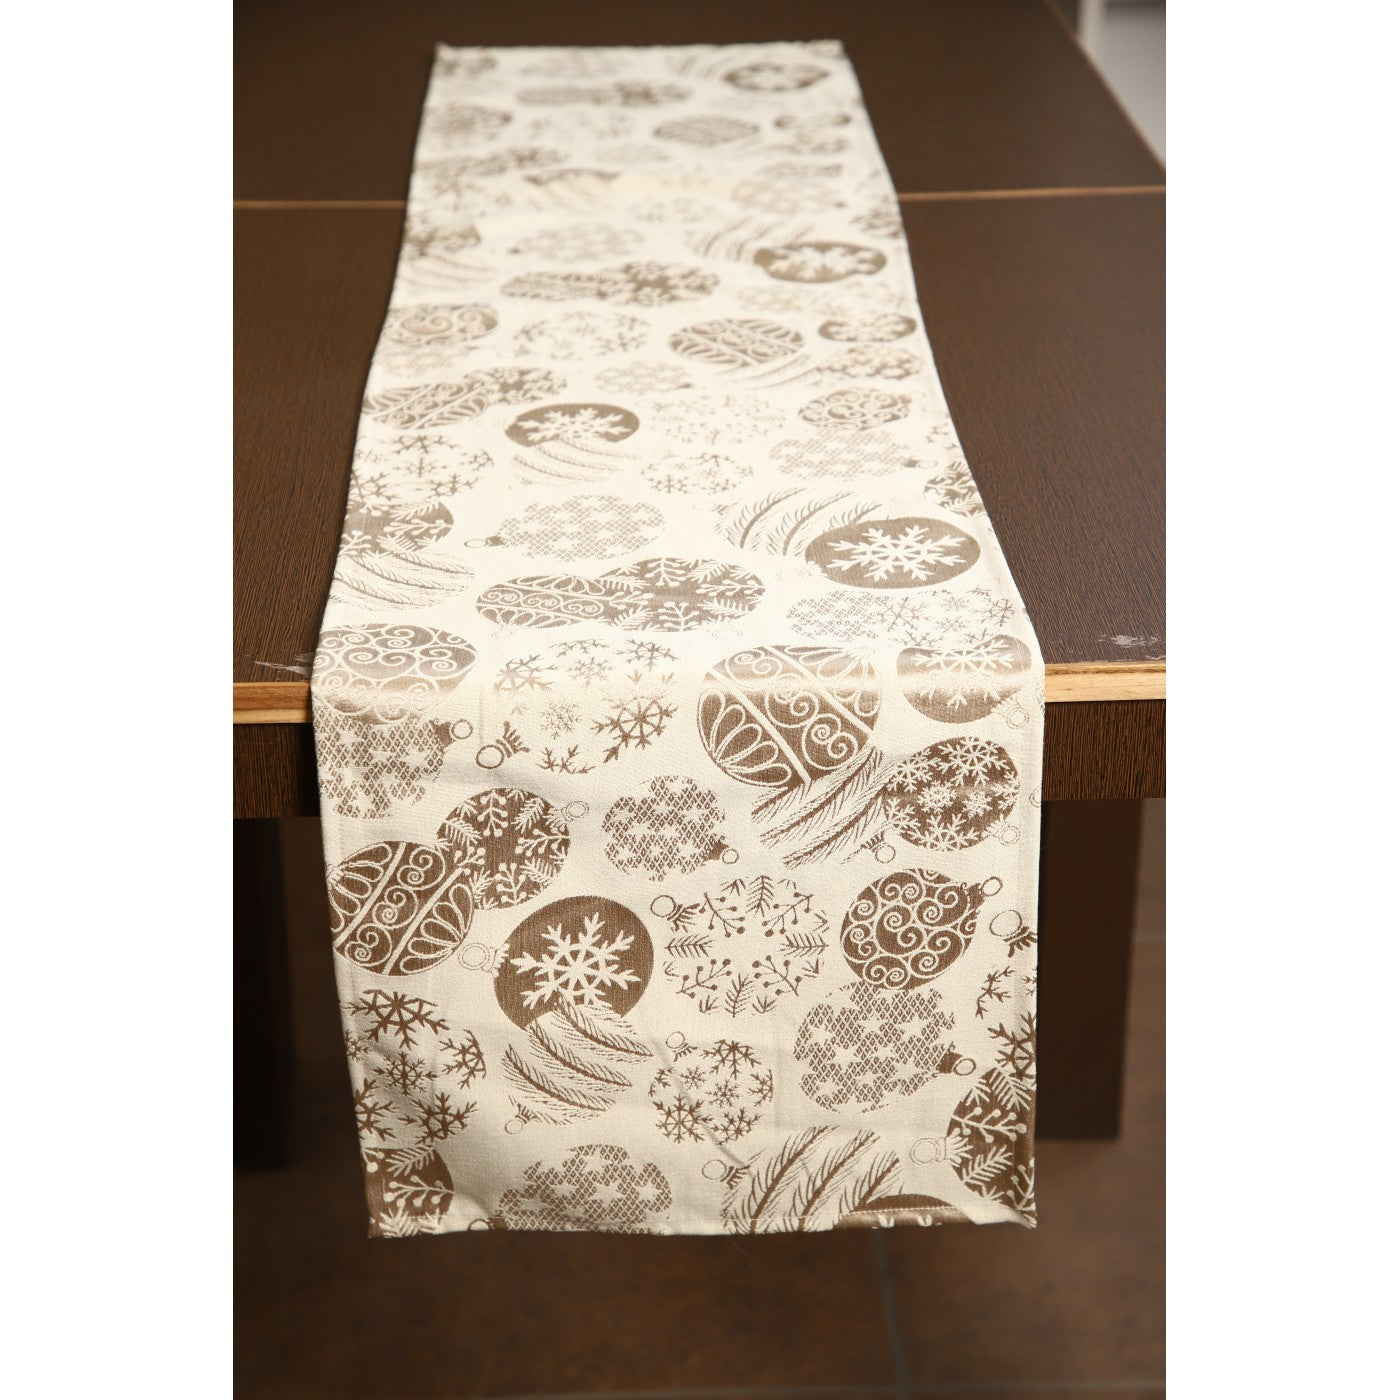 Autumn Elegance Fresh and Beige Table Runner Adorned with Delicate Leaves